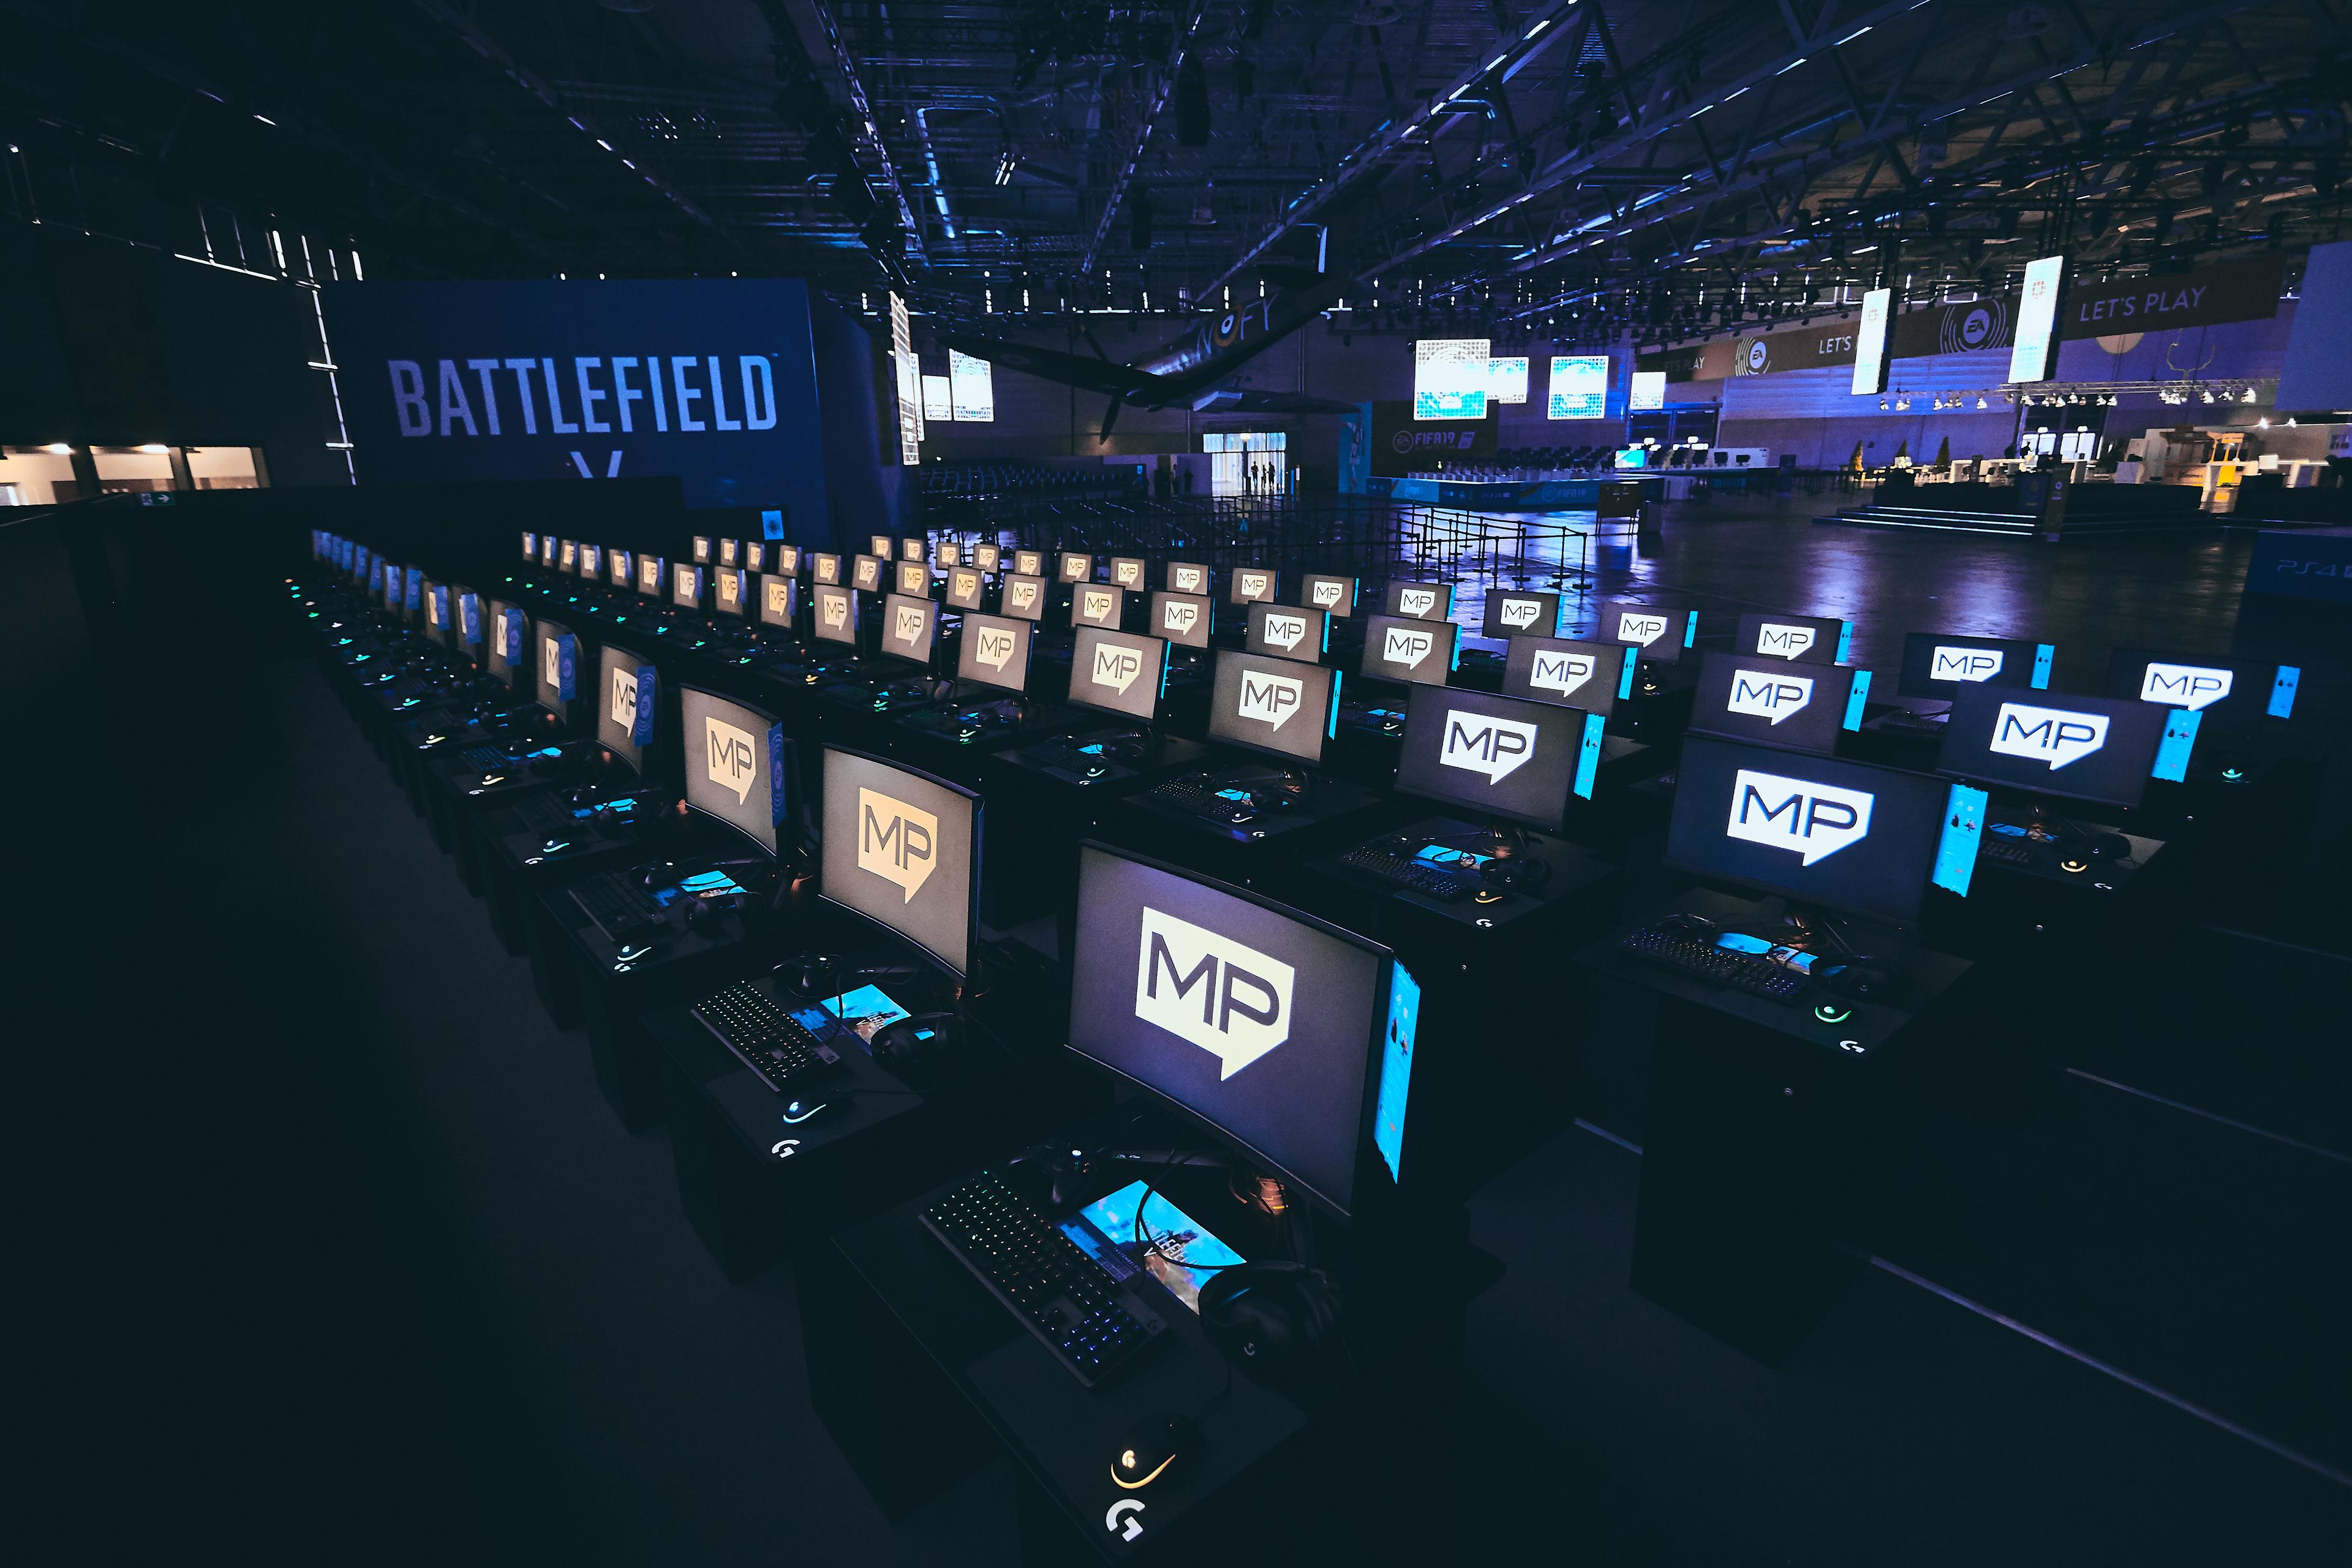 PC gaming stations at the Gamescom booth of Electronic Arts